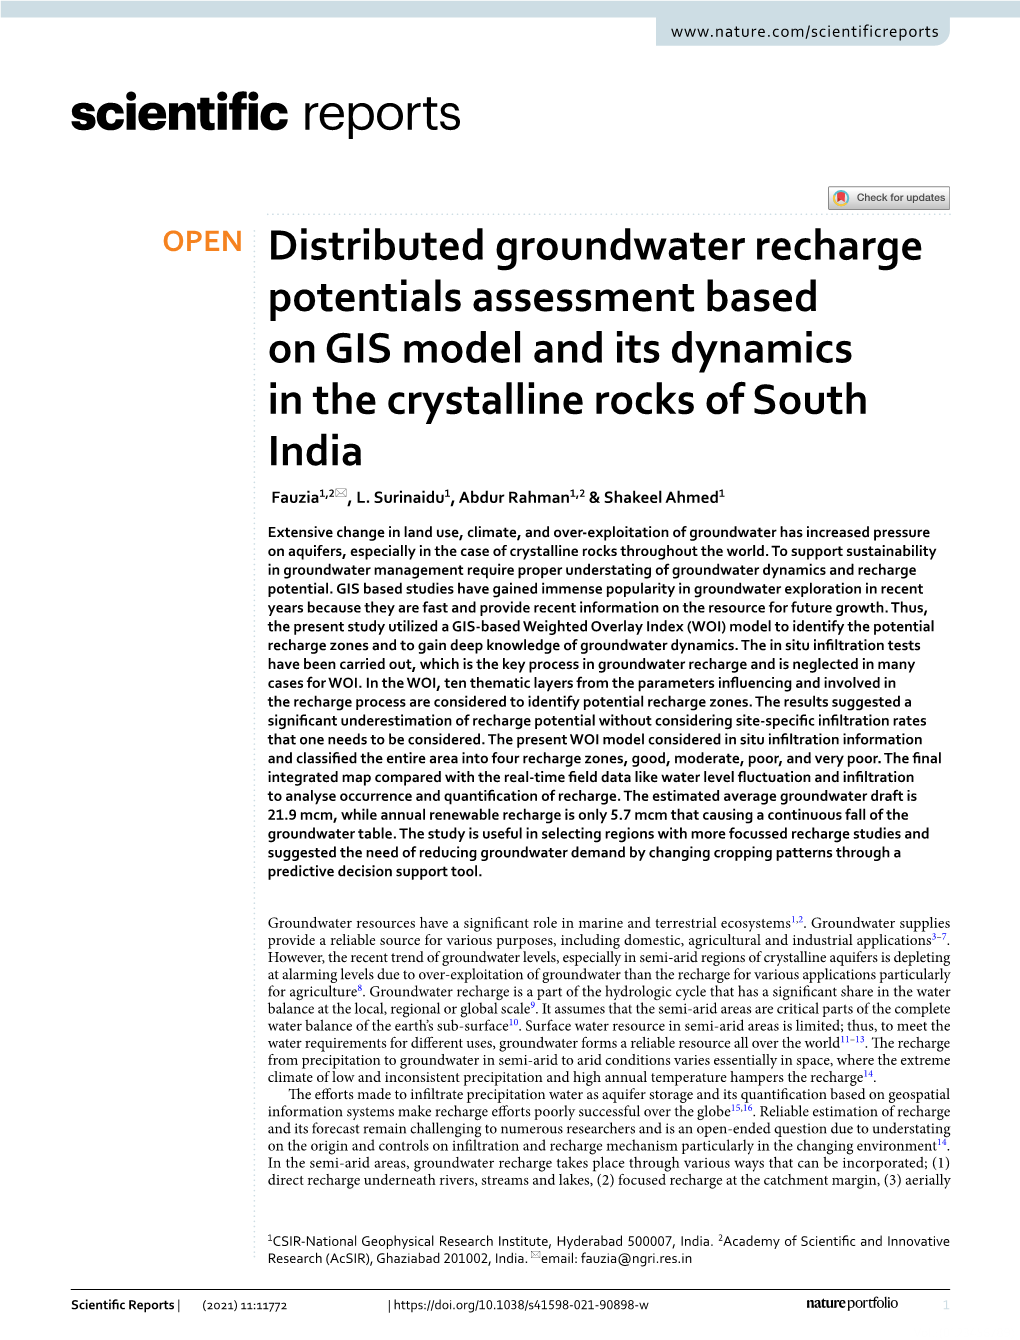 Distributed Groundwater Recharge Potentials Assessment Based on GIS Model and Its Dynamics in the Crystalline Rocks of South India Fauzia1,2*, L